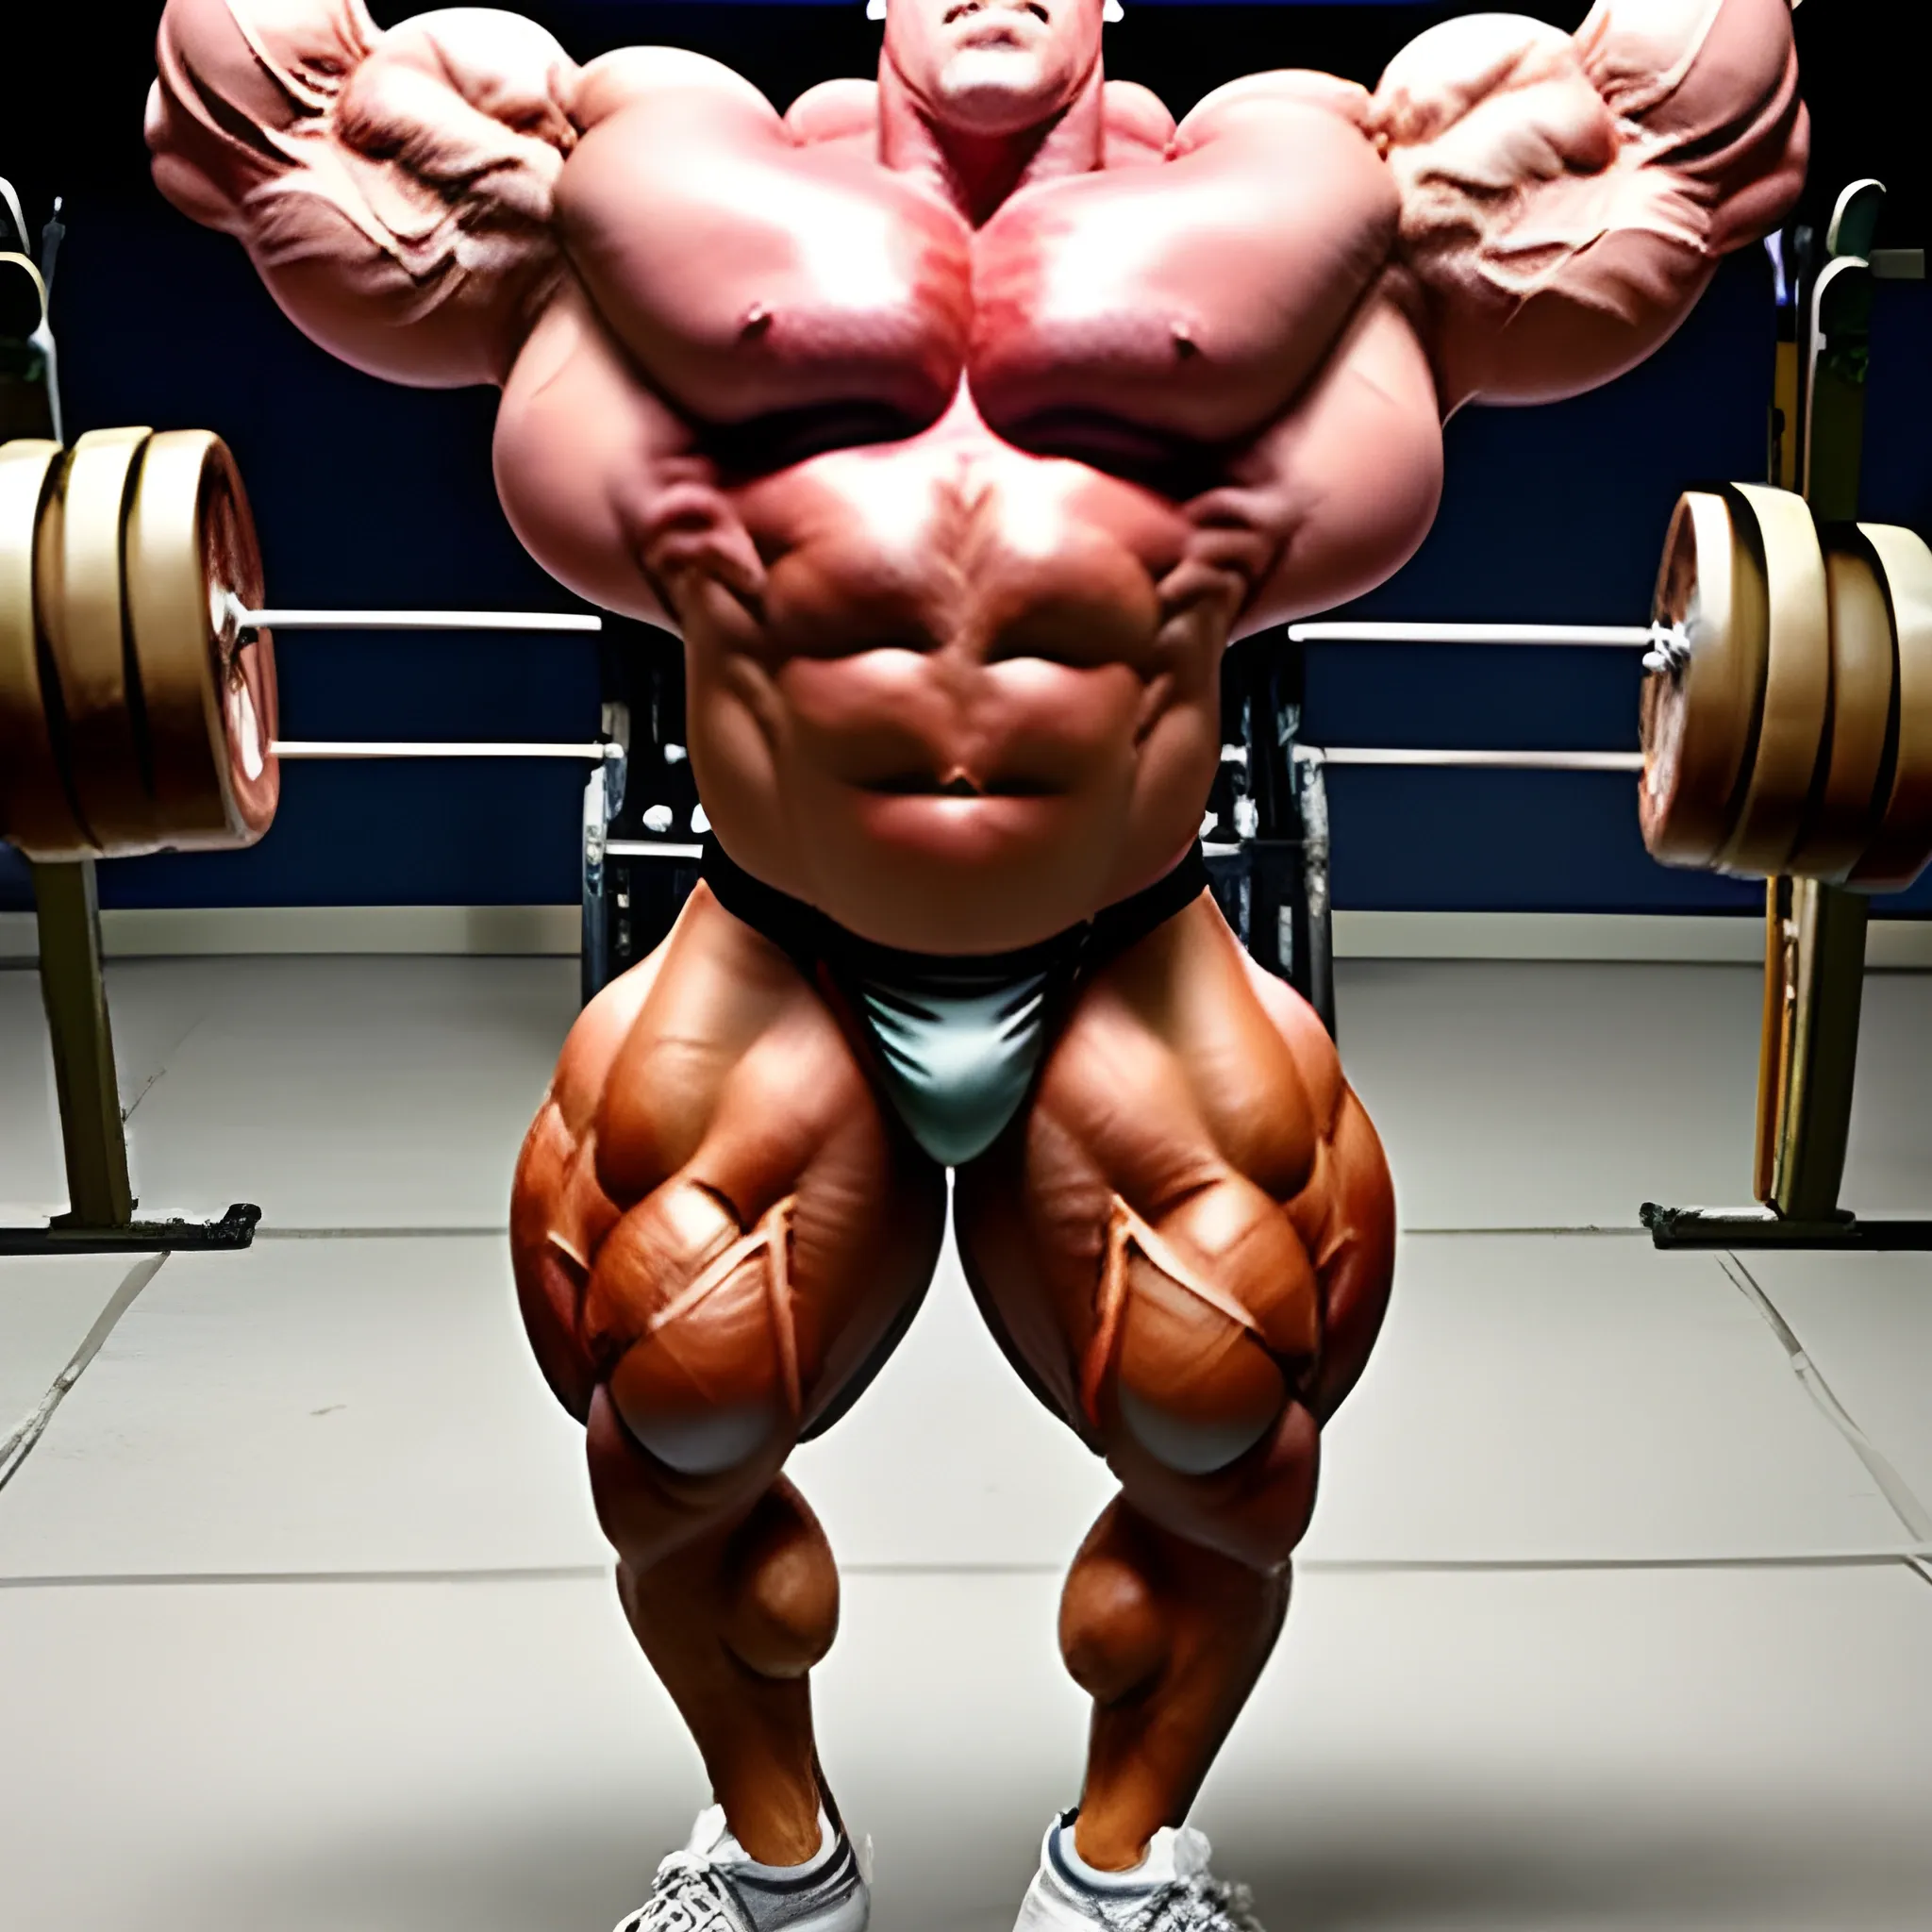 3-meter bodybuilder with a beautiful muscle morph, flex their massive 3000 lbs, BODY MONSTER MUSCLE,

